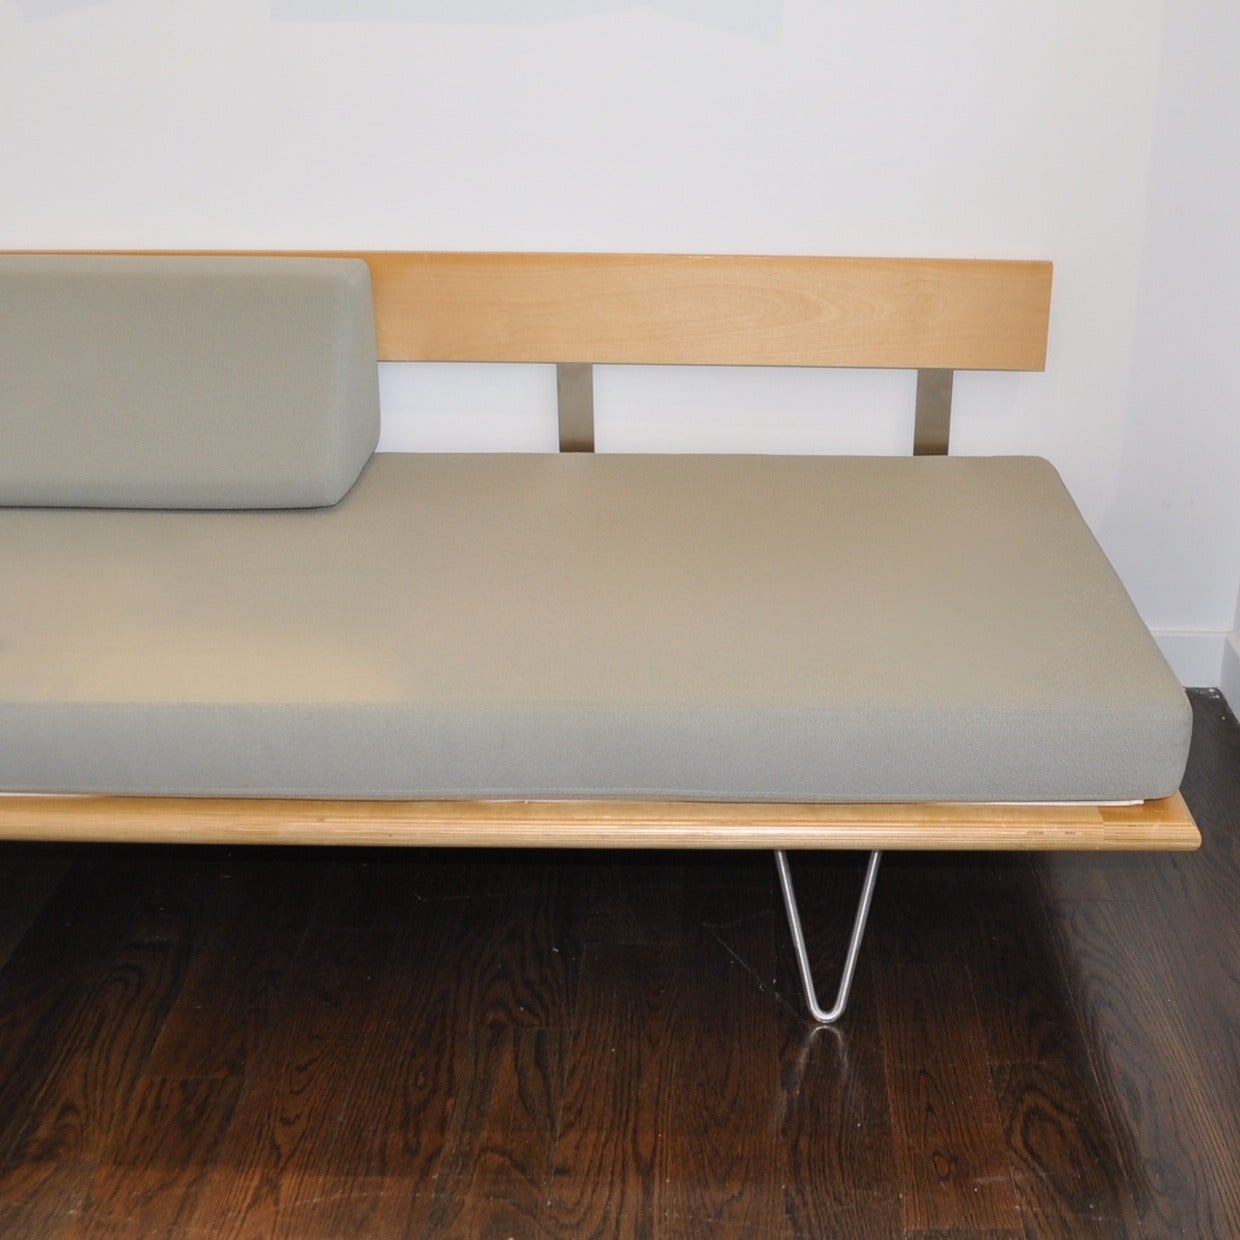 George Nelson designed an early version of this daybed for his own use in 1941. This version, with cushions and a backrest, resembles a cross between bed and sofa. Produced by Herman Miller from 1948 to approximately 1964.

The Case Study Daybed